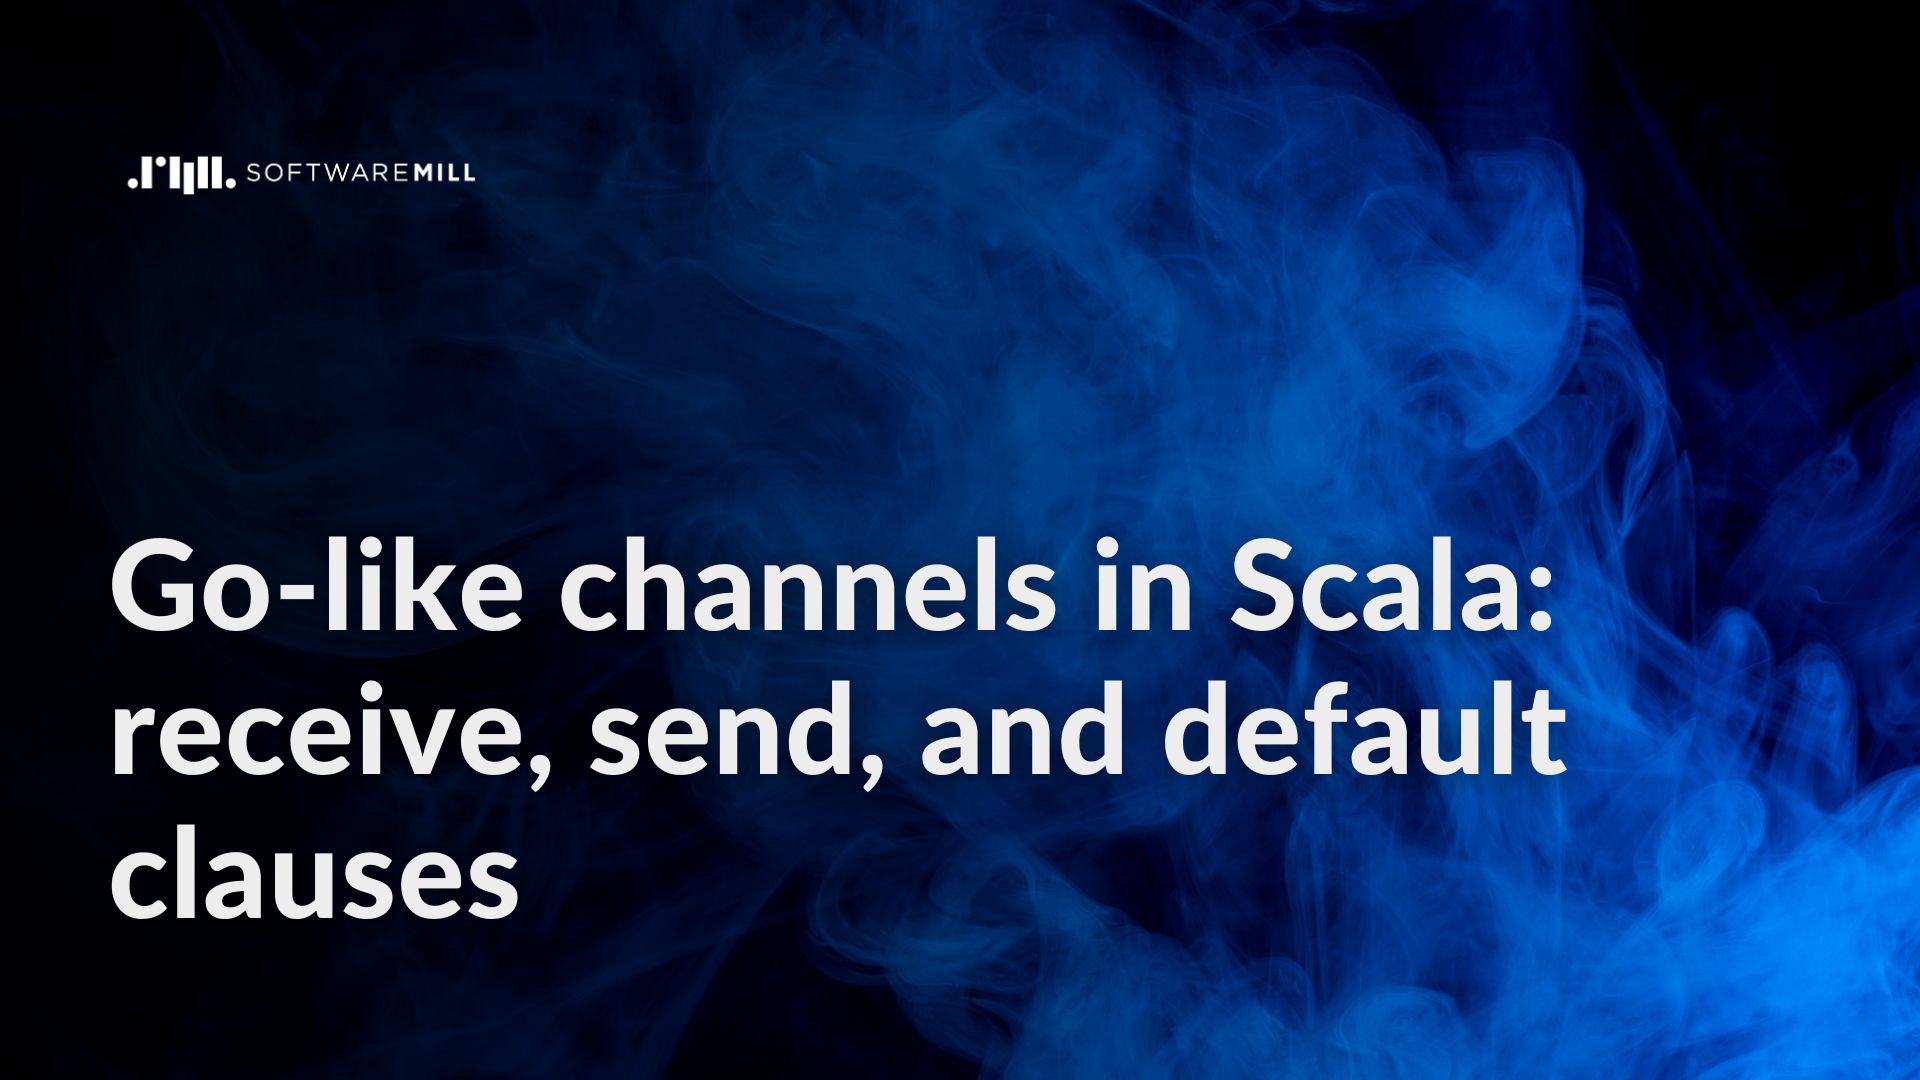 Go-like channels in Scala: receive, send, and default clauses webp image